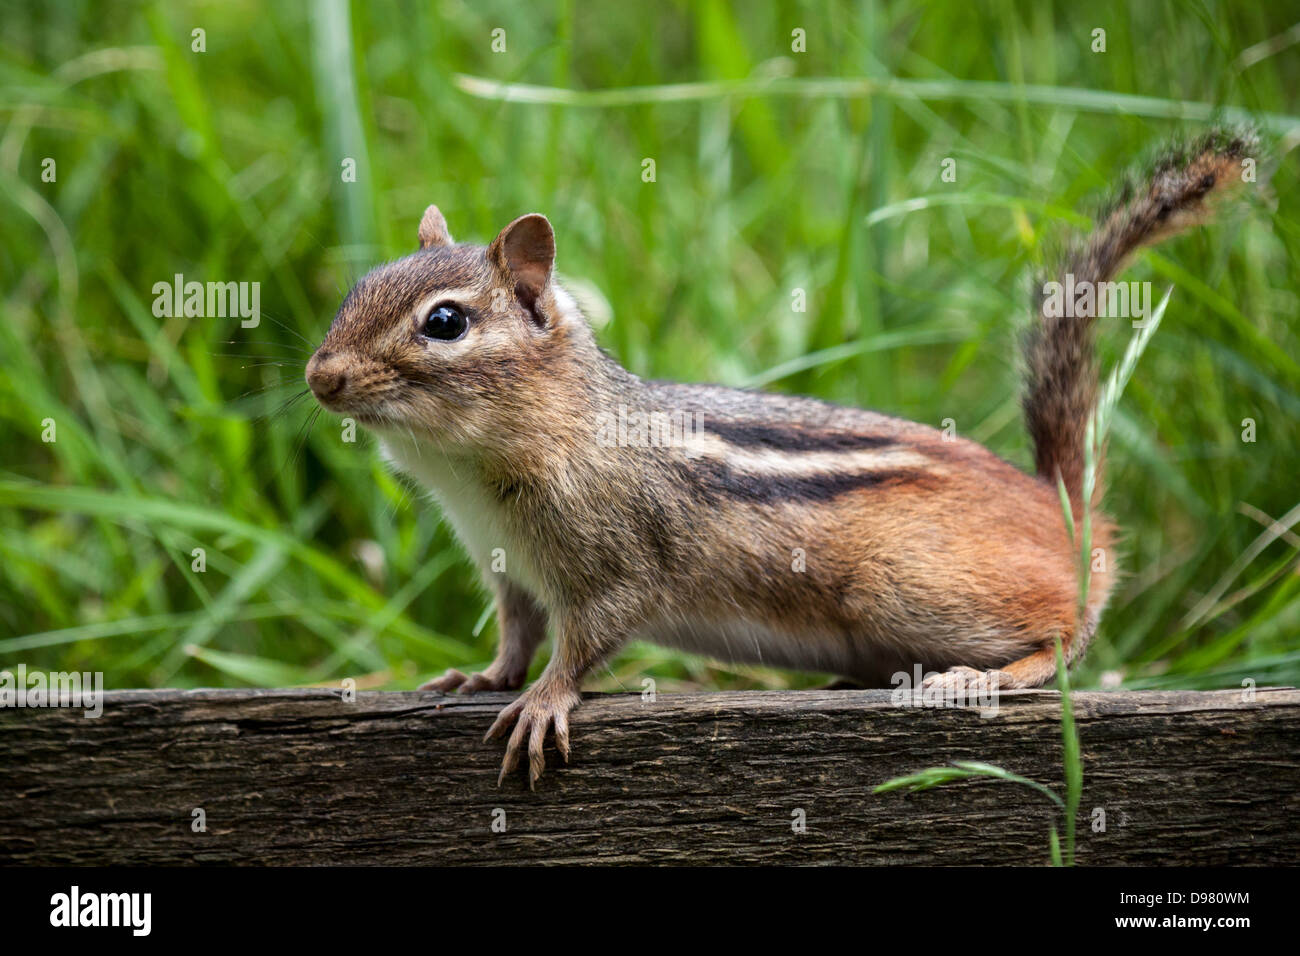 Eastern chipmunk perched on a a wooden fence with green grass in the background Stock Photo